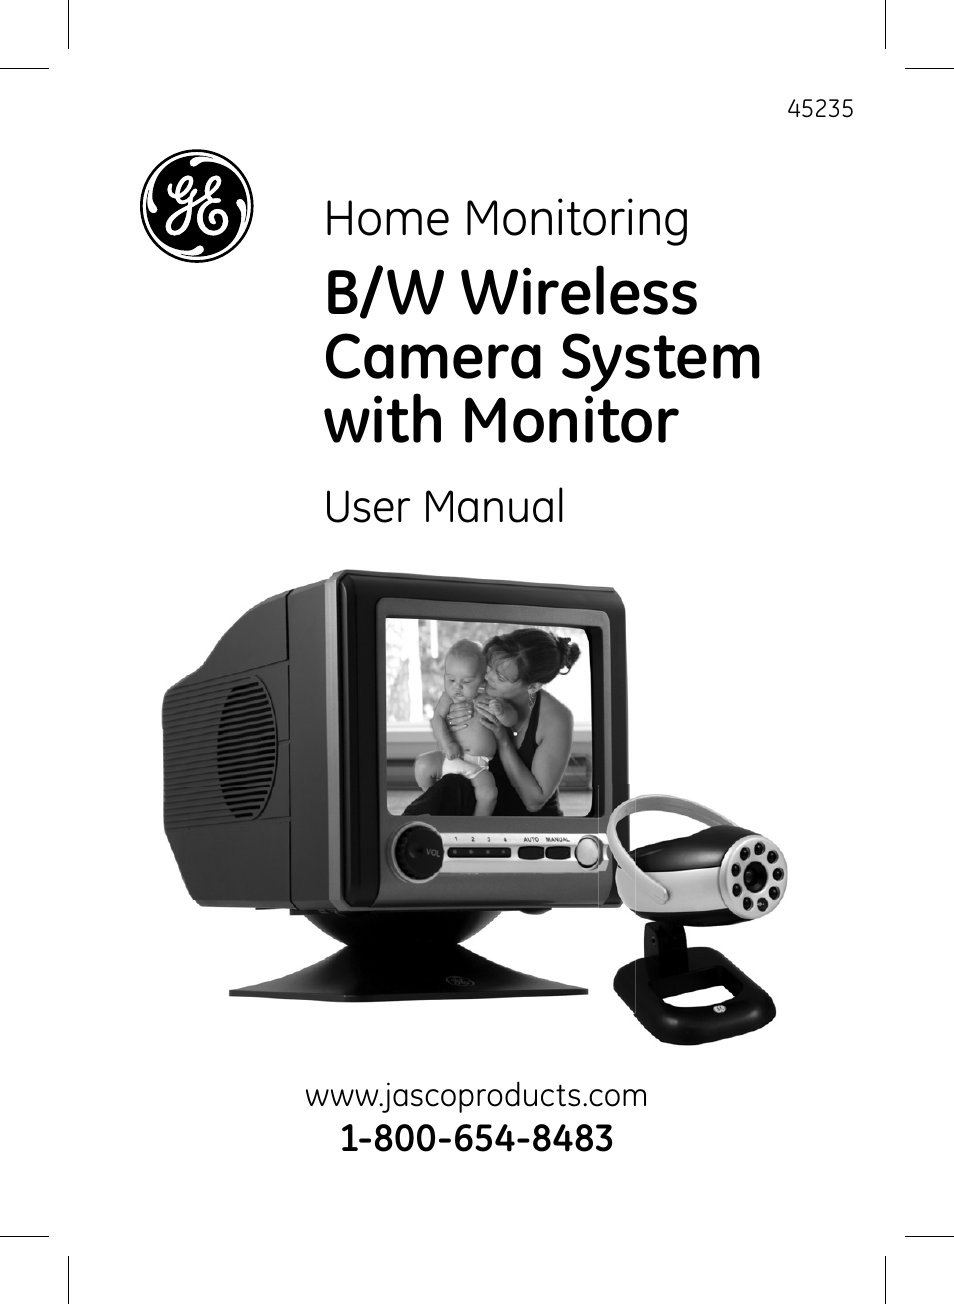 GE 45235 GE Home Monitoring Wireless Black-and-White Camera System with Monitor User Manual | 16 pages